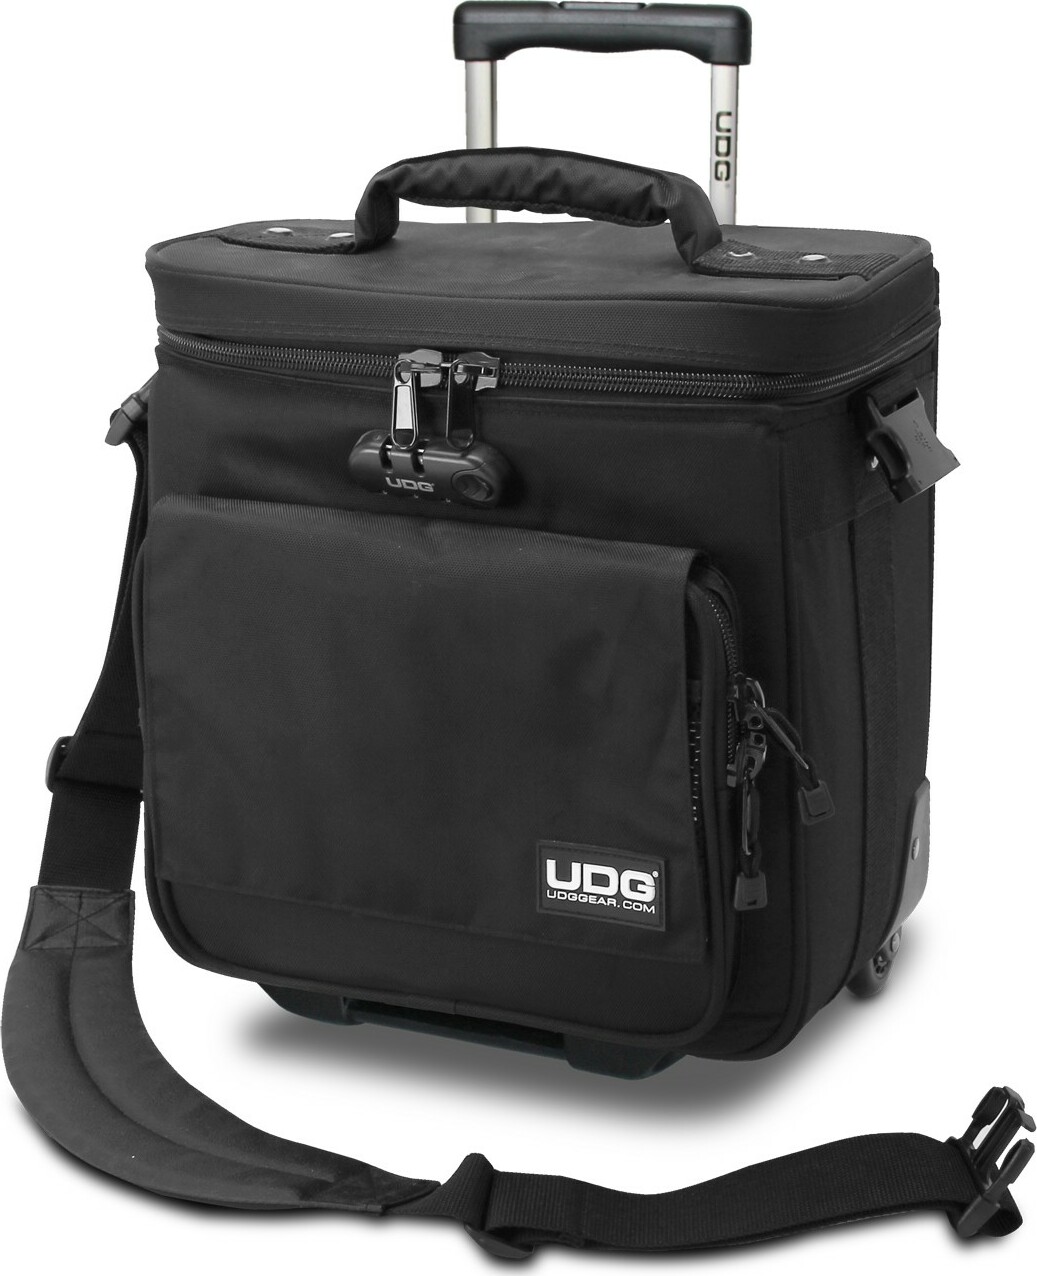 Udg Ultimate Trolley To Go Black - DJ trolley - Main picture